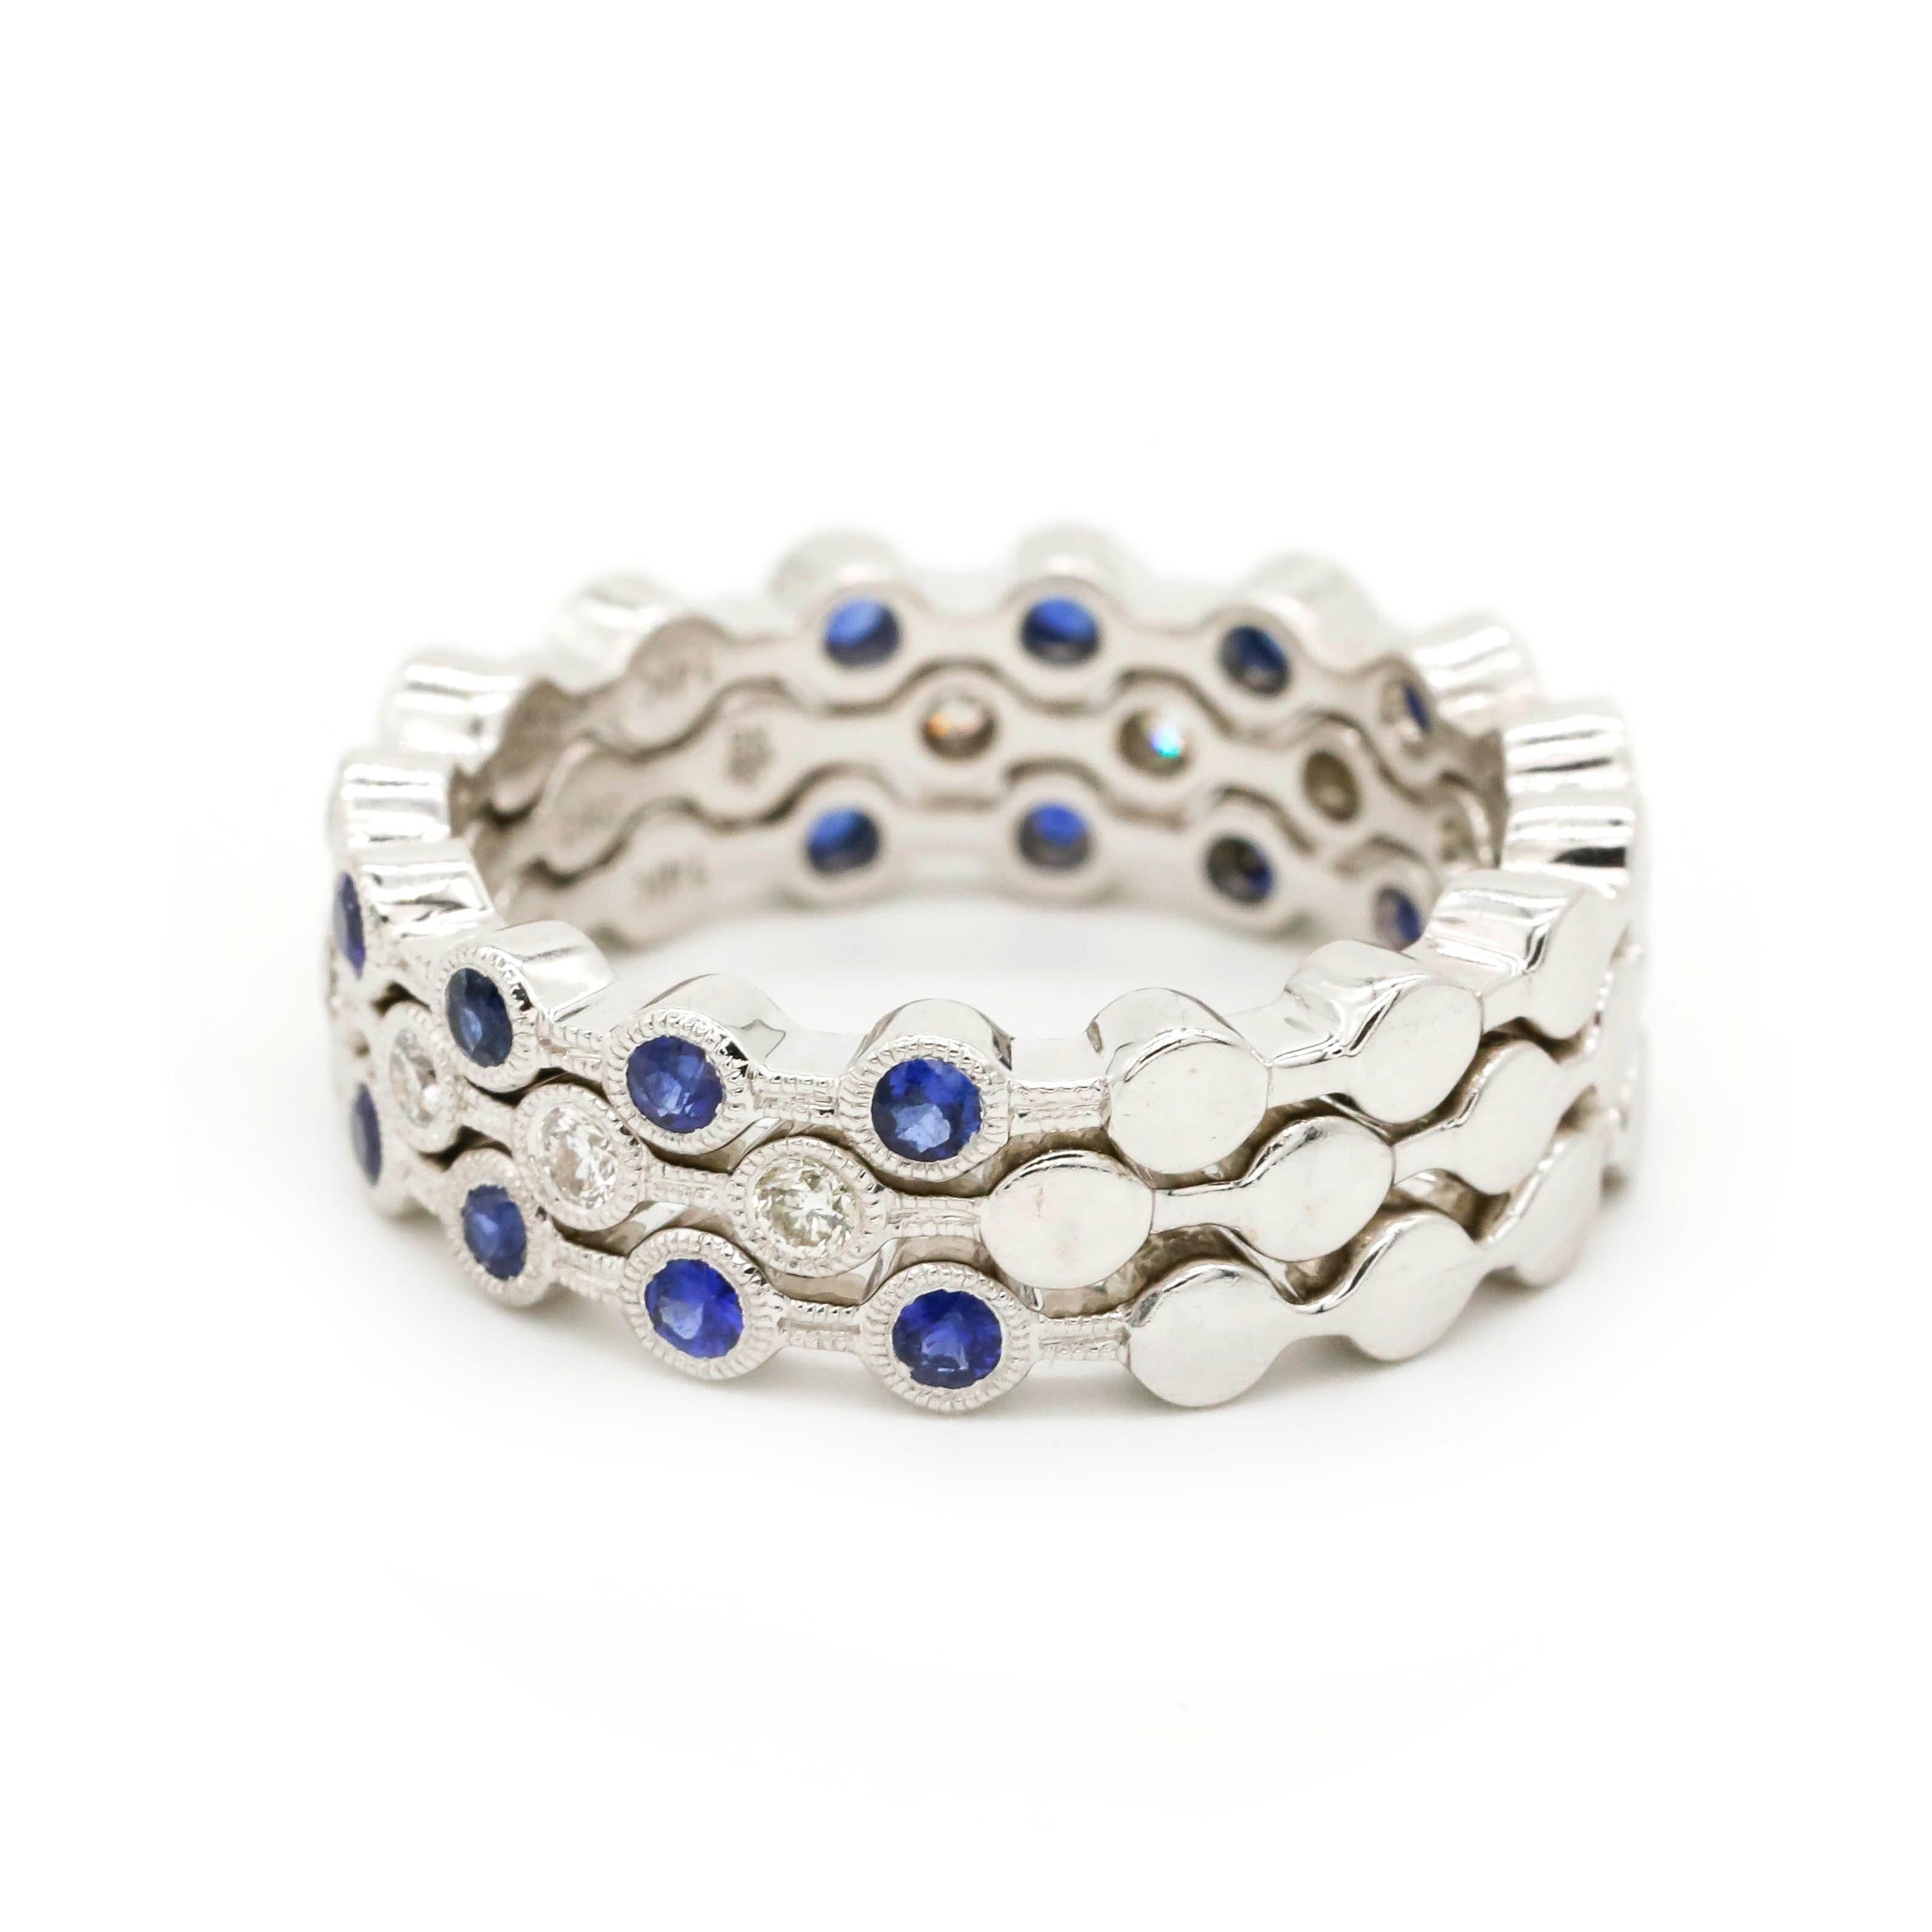 0.50 Carat Round Cut Diamond Blue Sapphire 14k White Gold Eternity Band Ring 

A wedding band or an Anniversary ring - this ring is just perfection. Featuring a single row of 0.68 Carat natural blue sapphire stones , set in a Bezel setting. Buffed